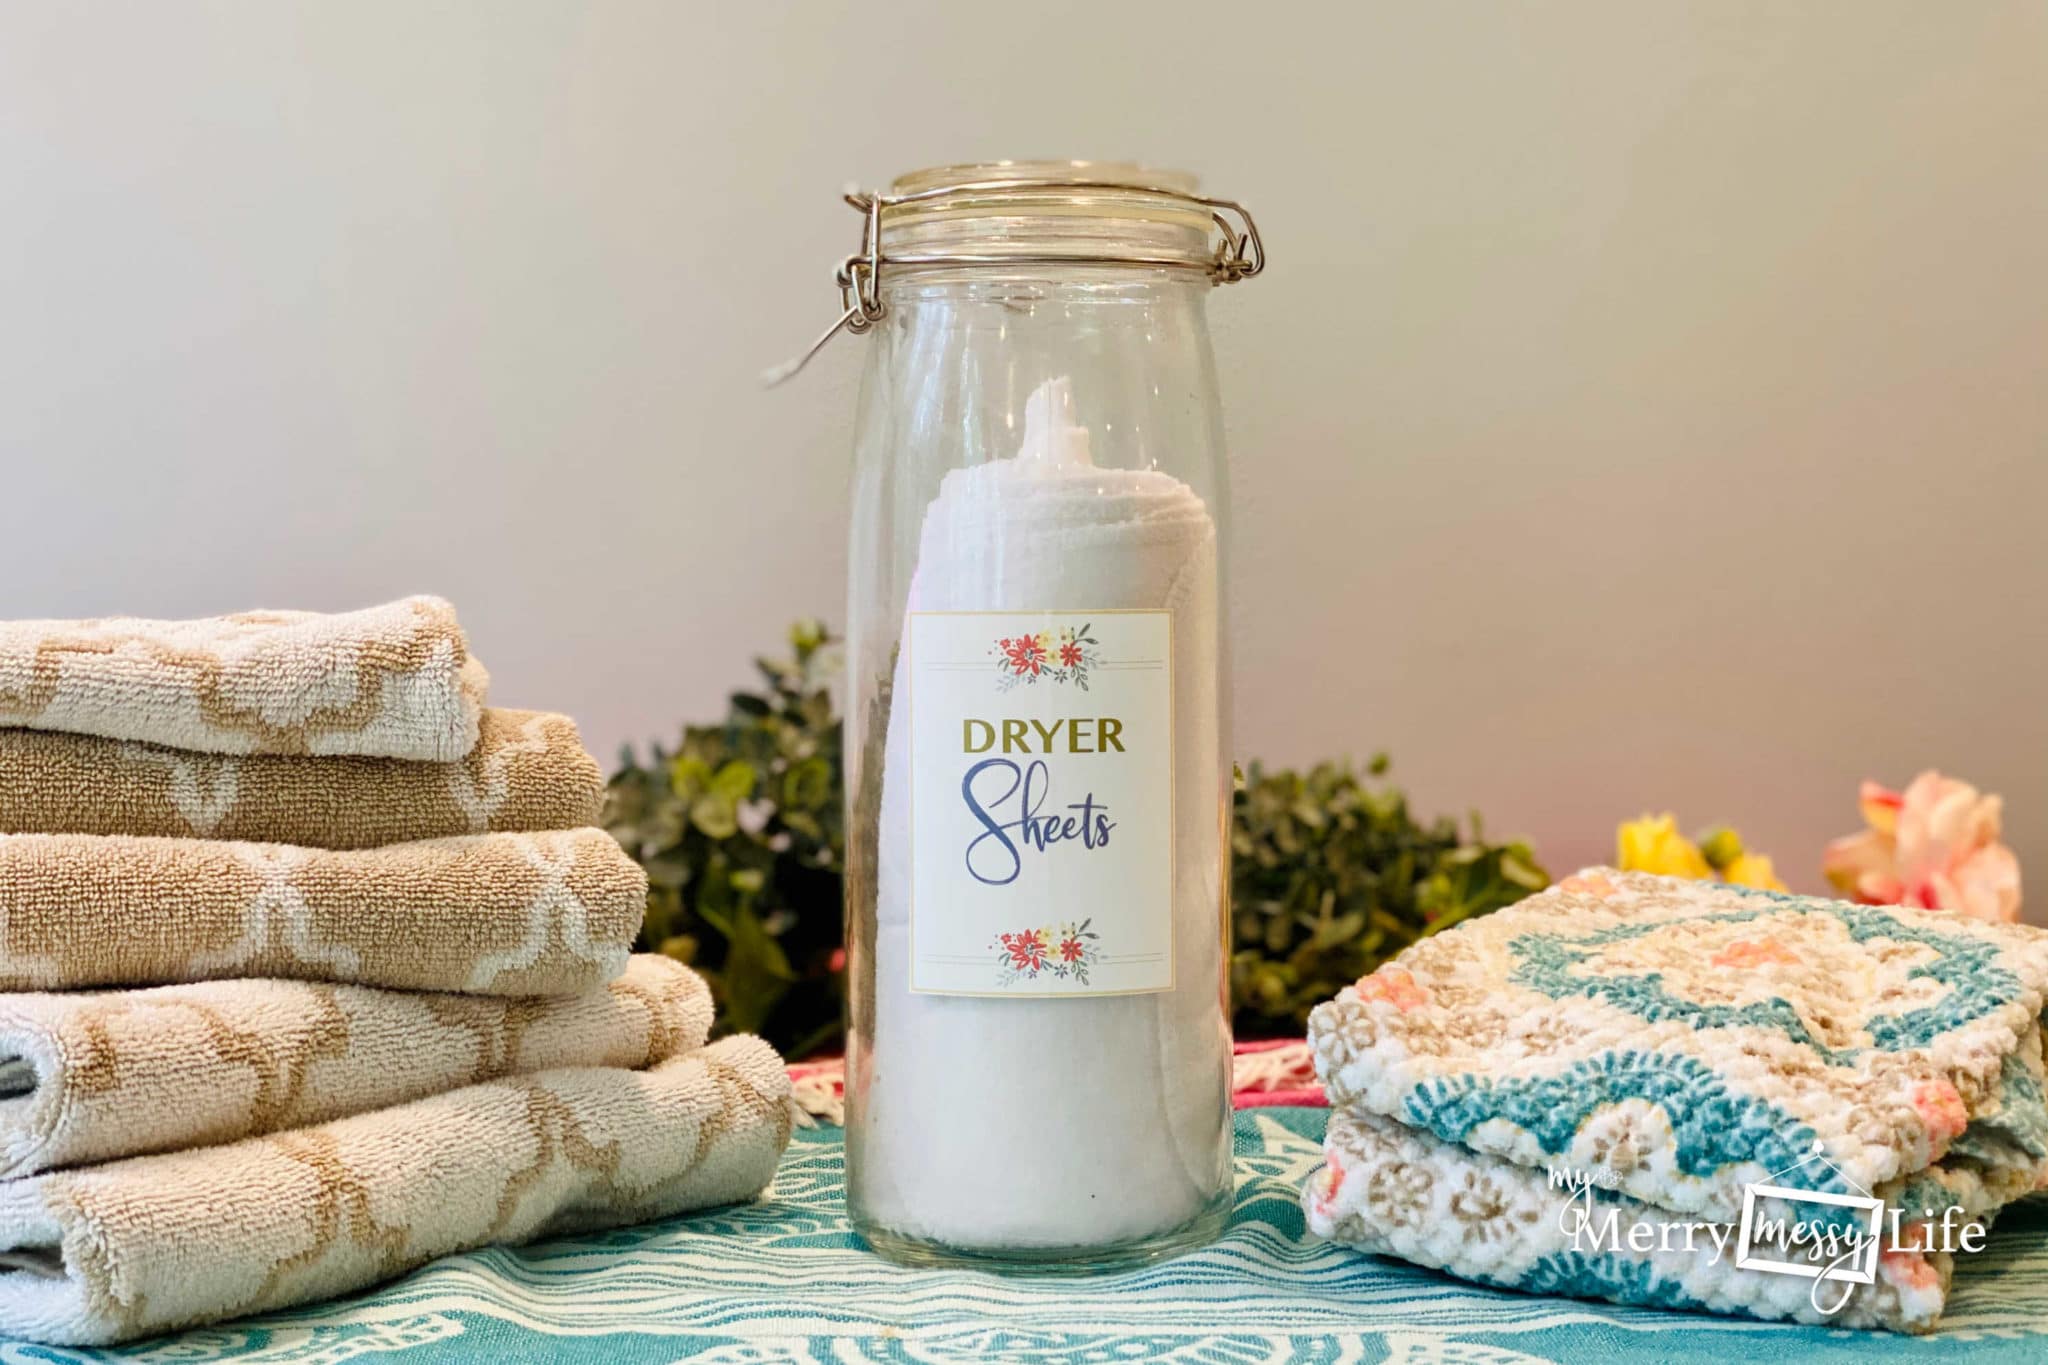 DIY Natural Dryer Sheets Recipe and Tutorial using just water, vinegar and essential oils